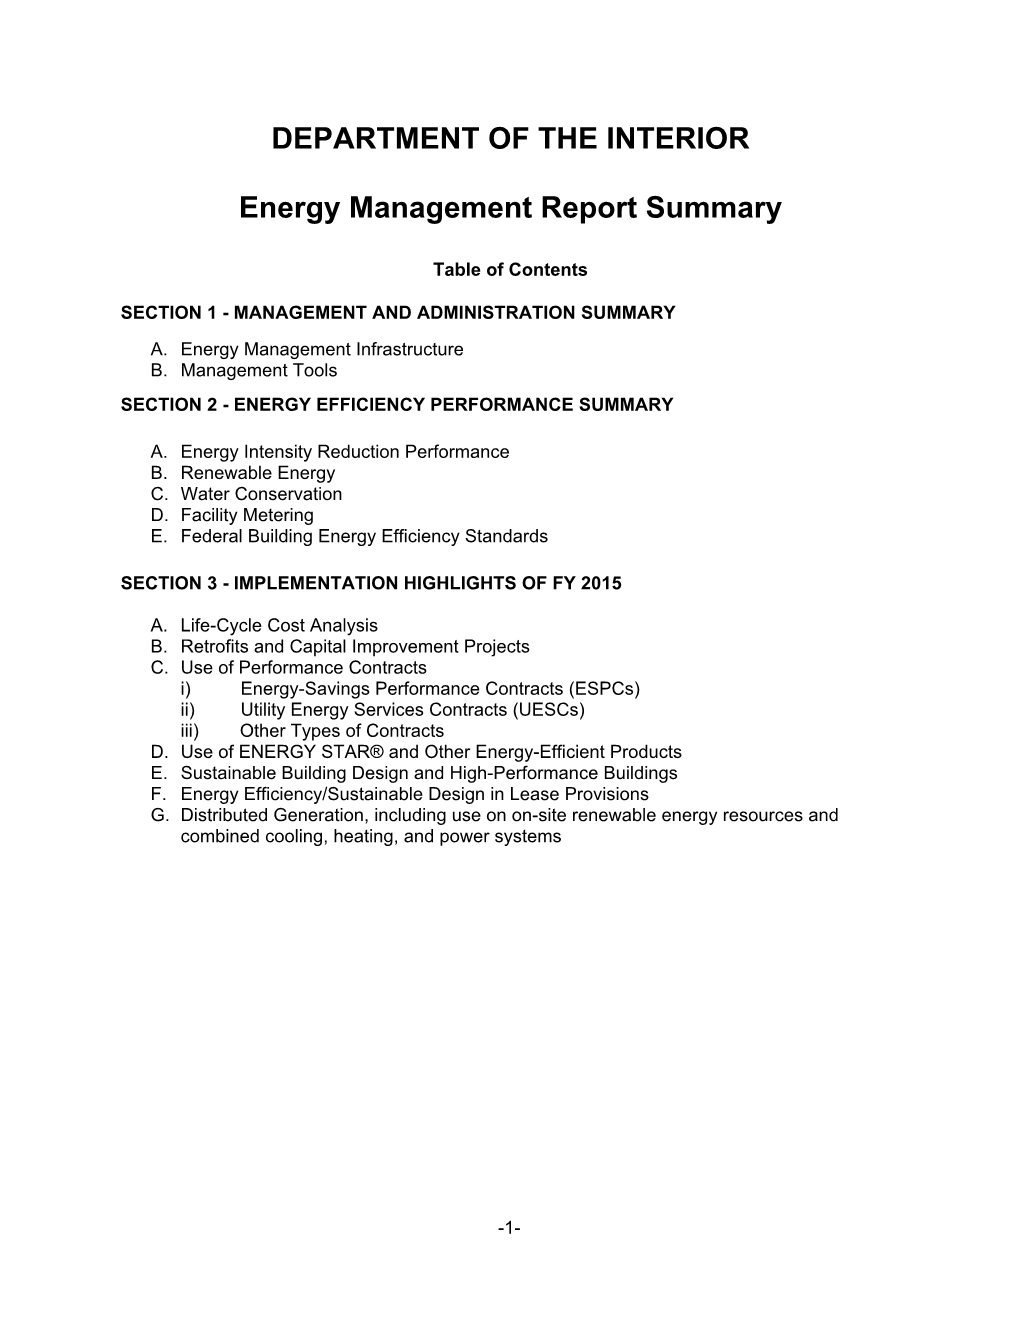 FY 2015 Annual Report of Energy